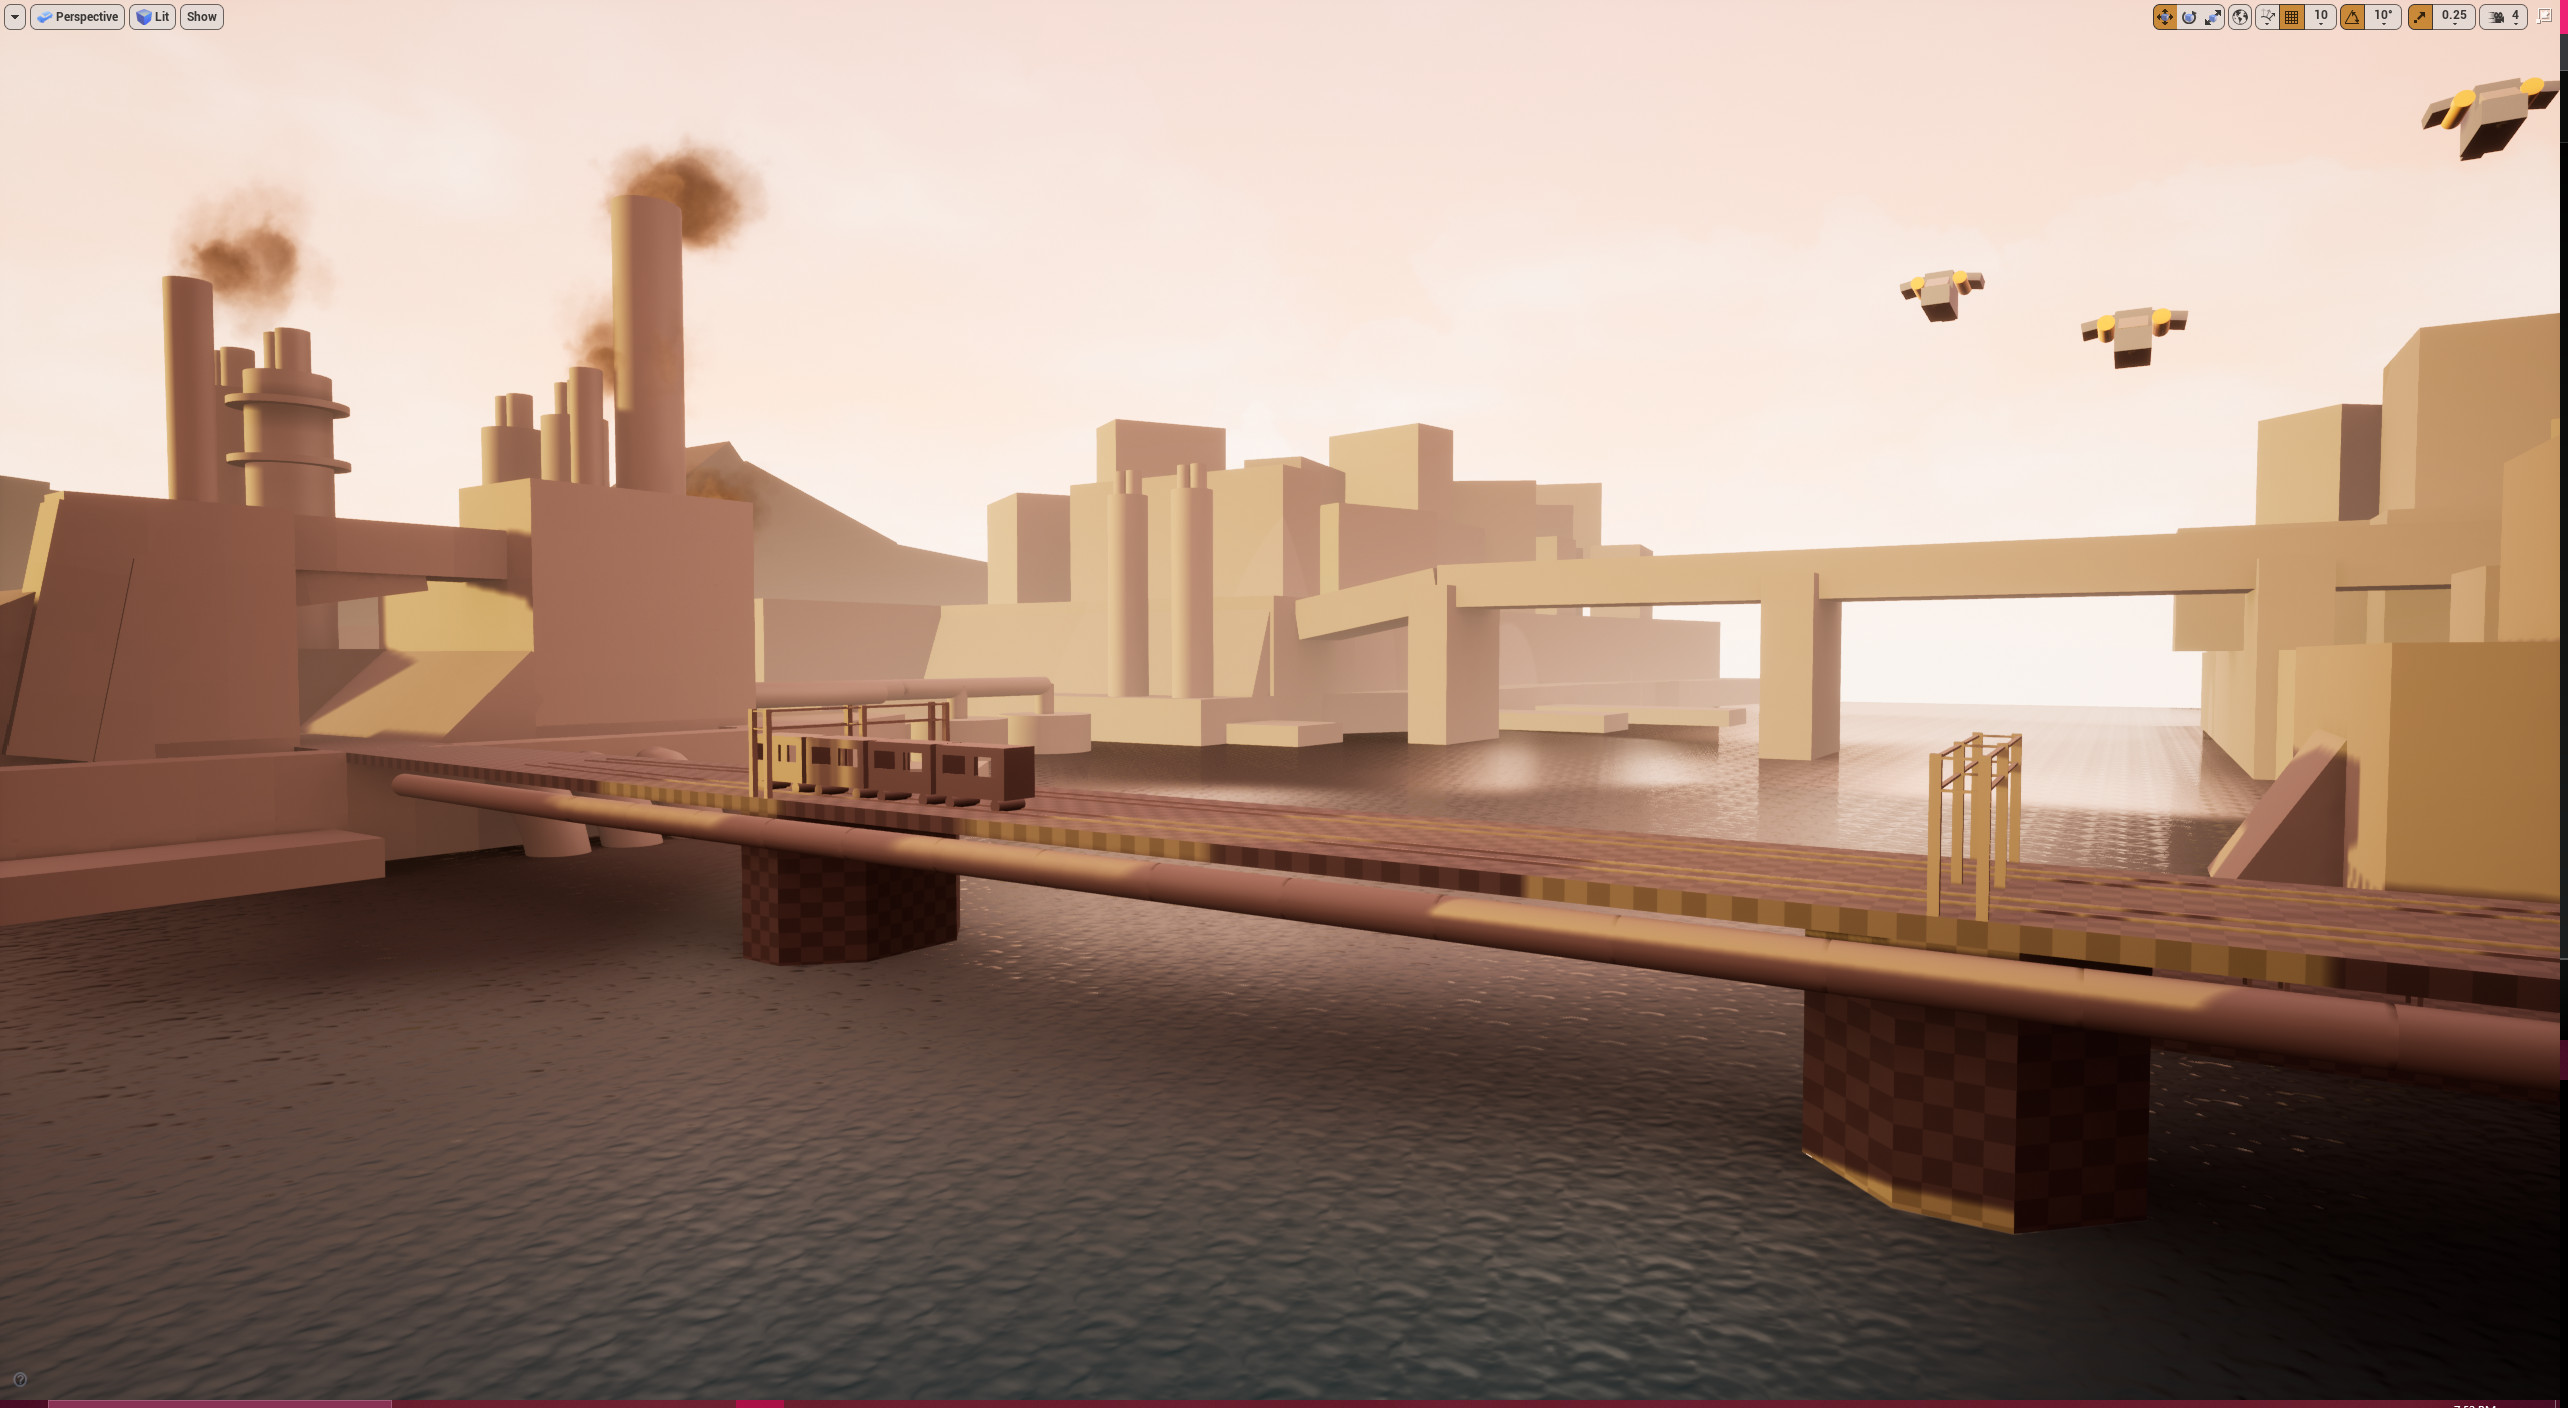 Another shot of the bridge and the refinery objective in the distance.